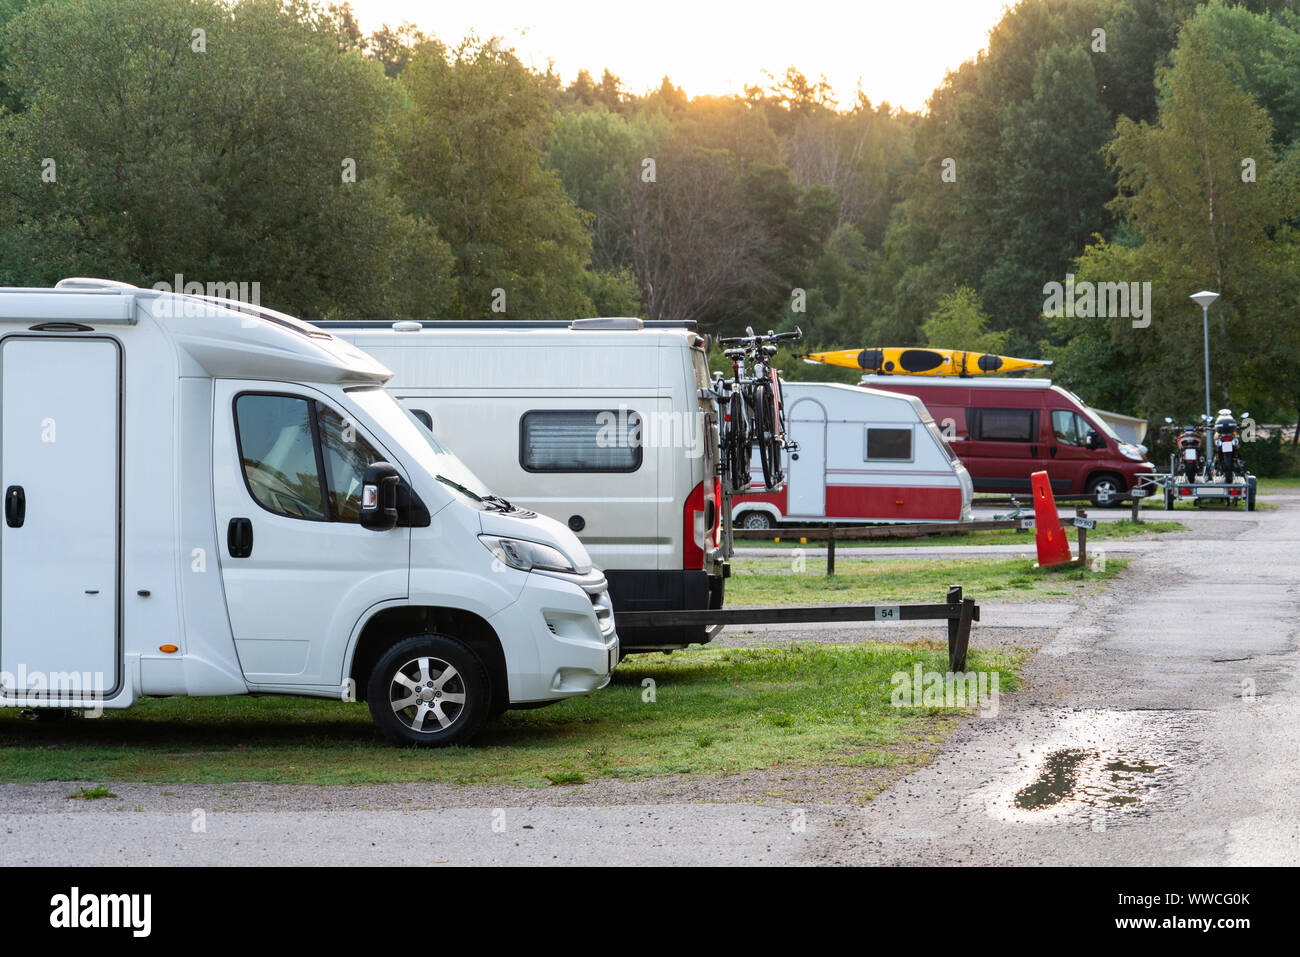 Camper vans in a camping park Stock Photo